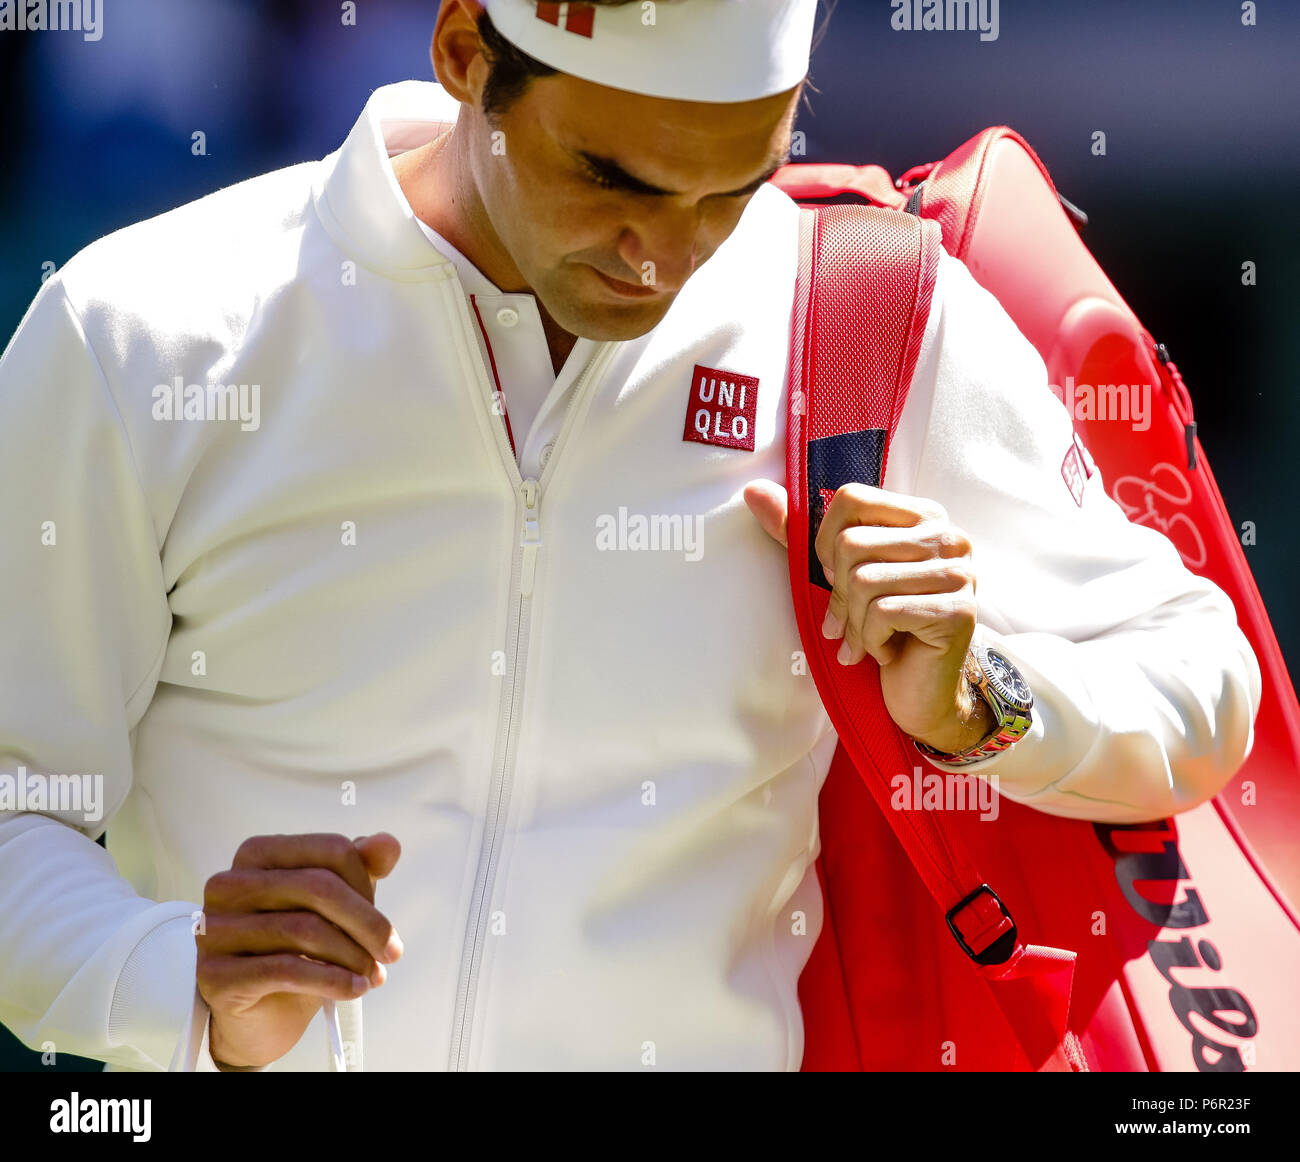 UK, 2nd July 2018: Roger Federer of Switzerland wears japanese clothing from his new outfitter Uniqlo during Day 1 at the Wimbledon Tennis Championships 2018 at the All Lawn